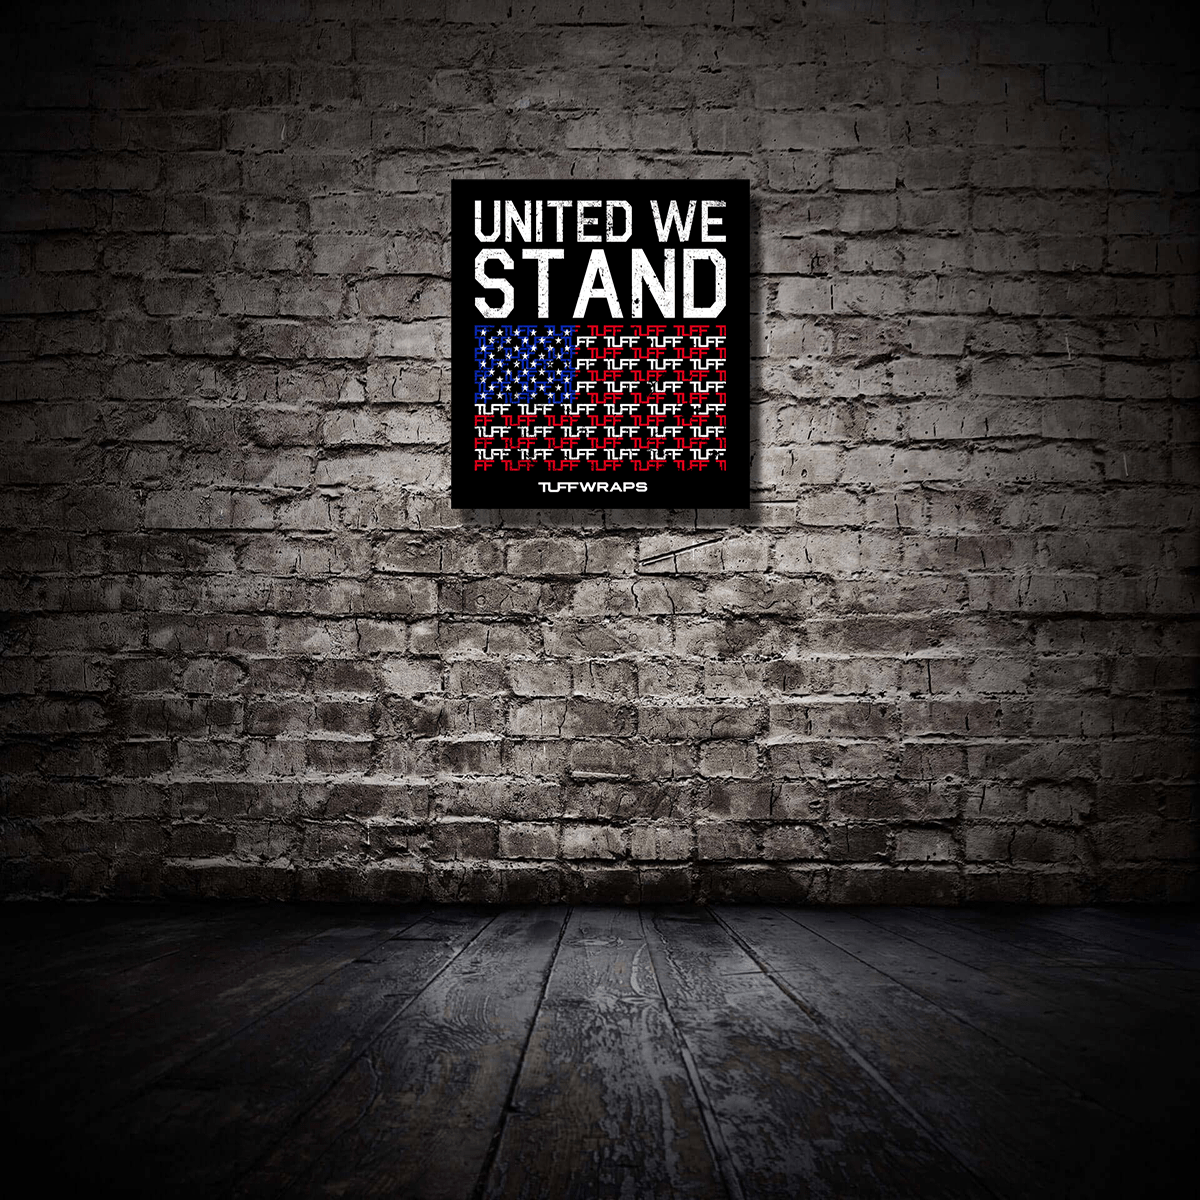 United We Stand 3x3 Wall Banner Banners